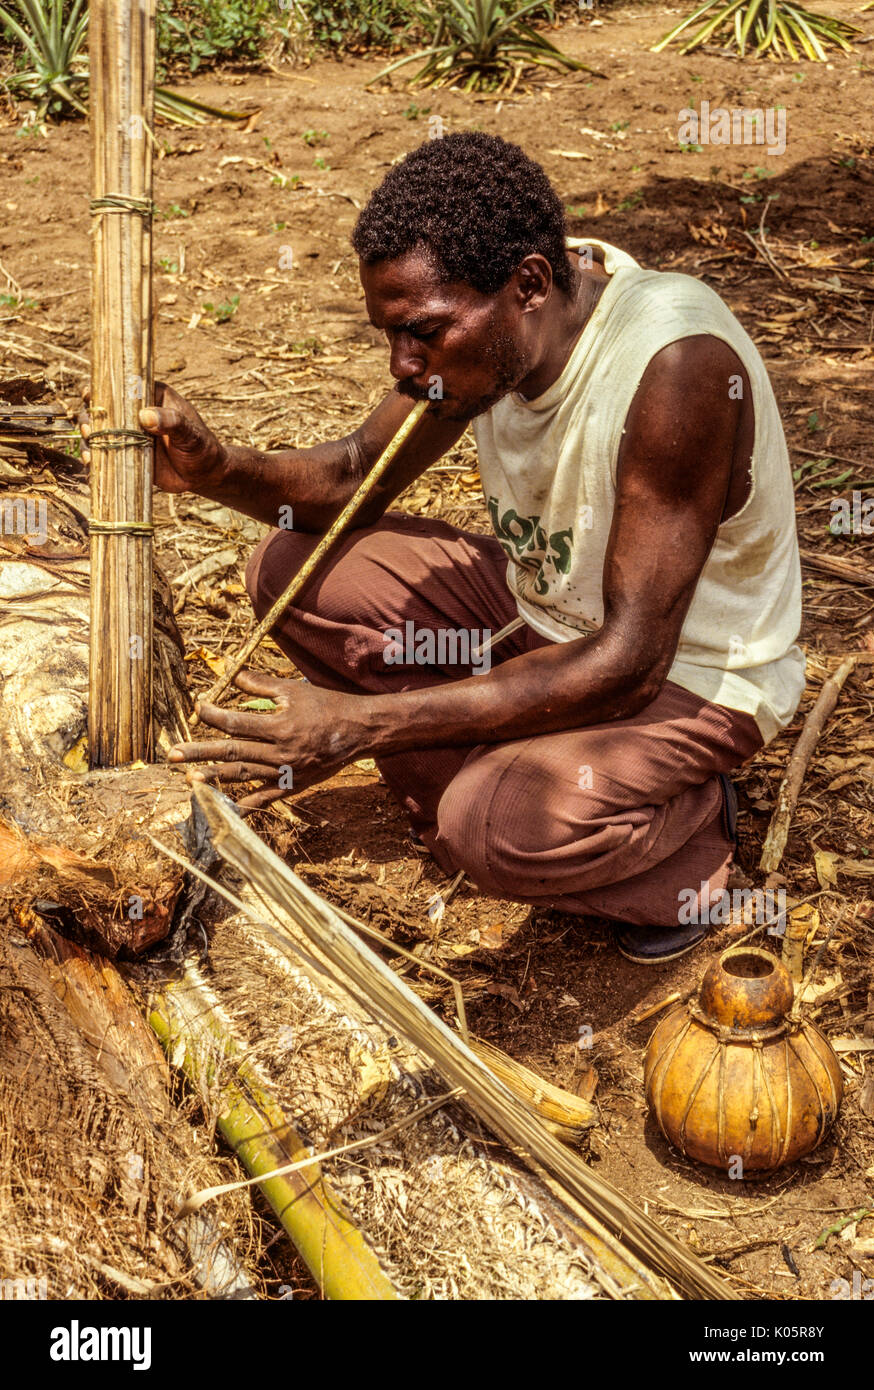 Cote d'Ivoire, Ivory Coast, West Africa.  Stages of Making Palm Wine:  Baole Man blowing air on heated sticks to make palm juice flow.  Lolobo Village Stock Photo